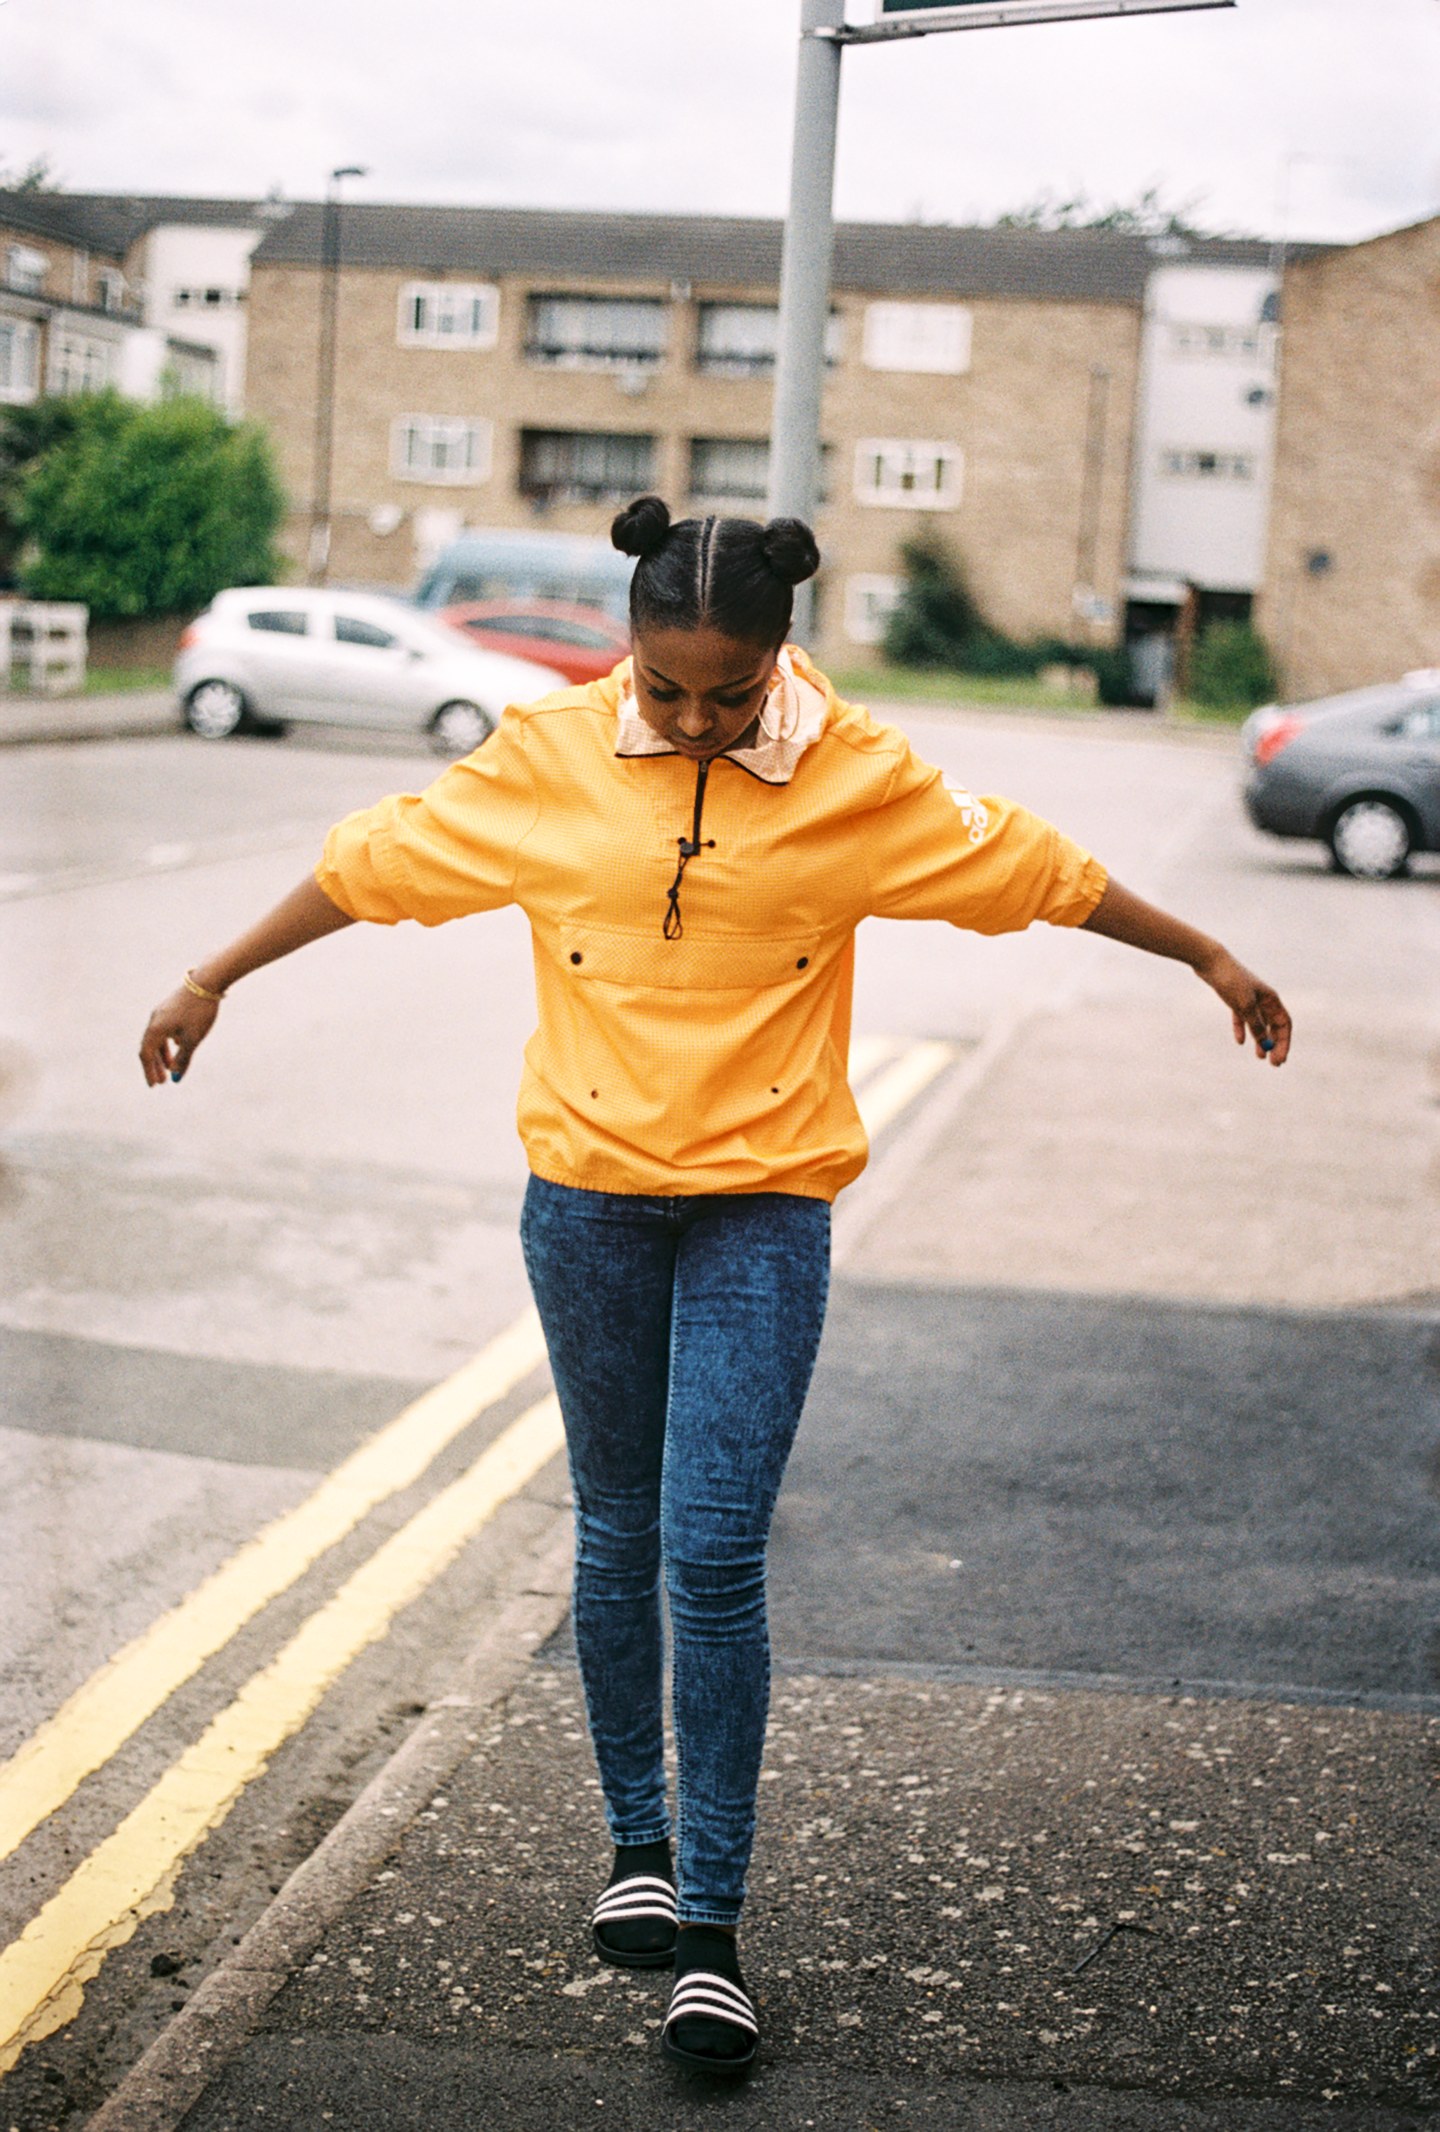 Meet Nadia Rose, The Sharp-Tongued Joker Who Can’t Be Stopped